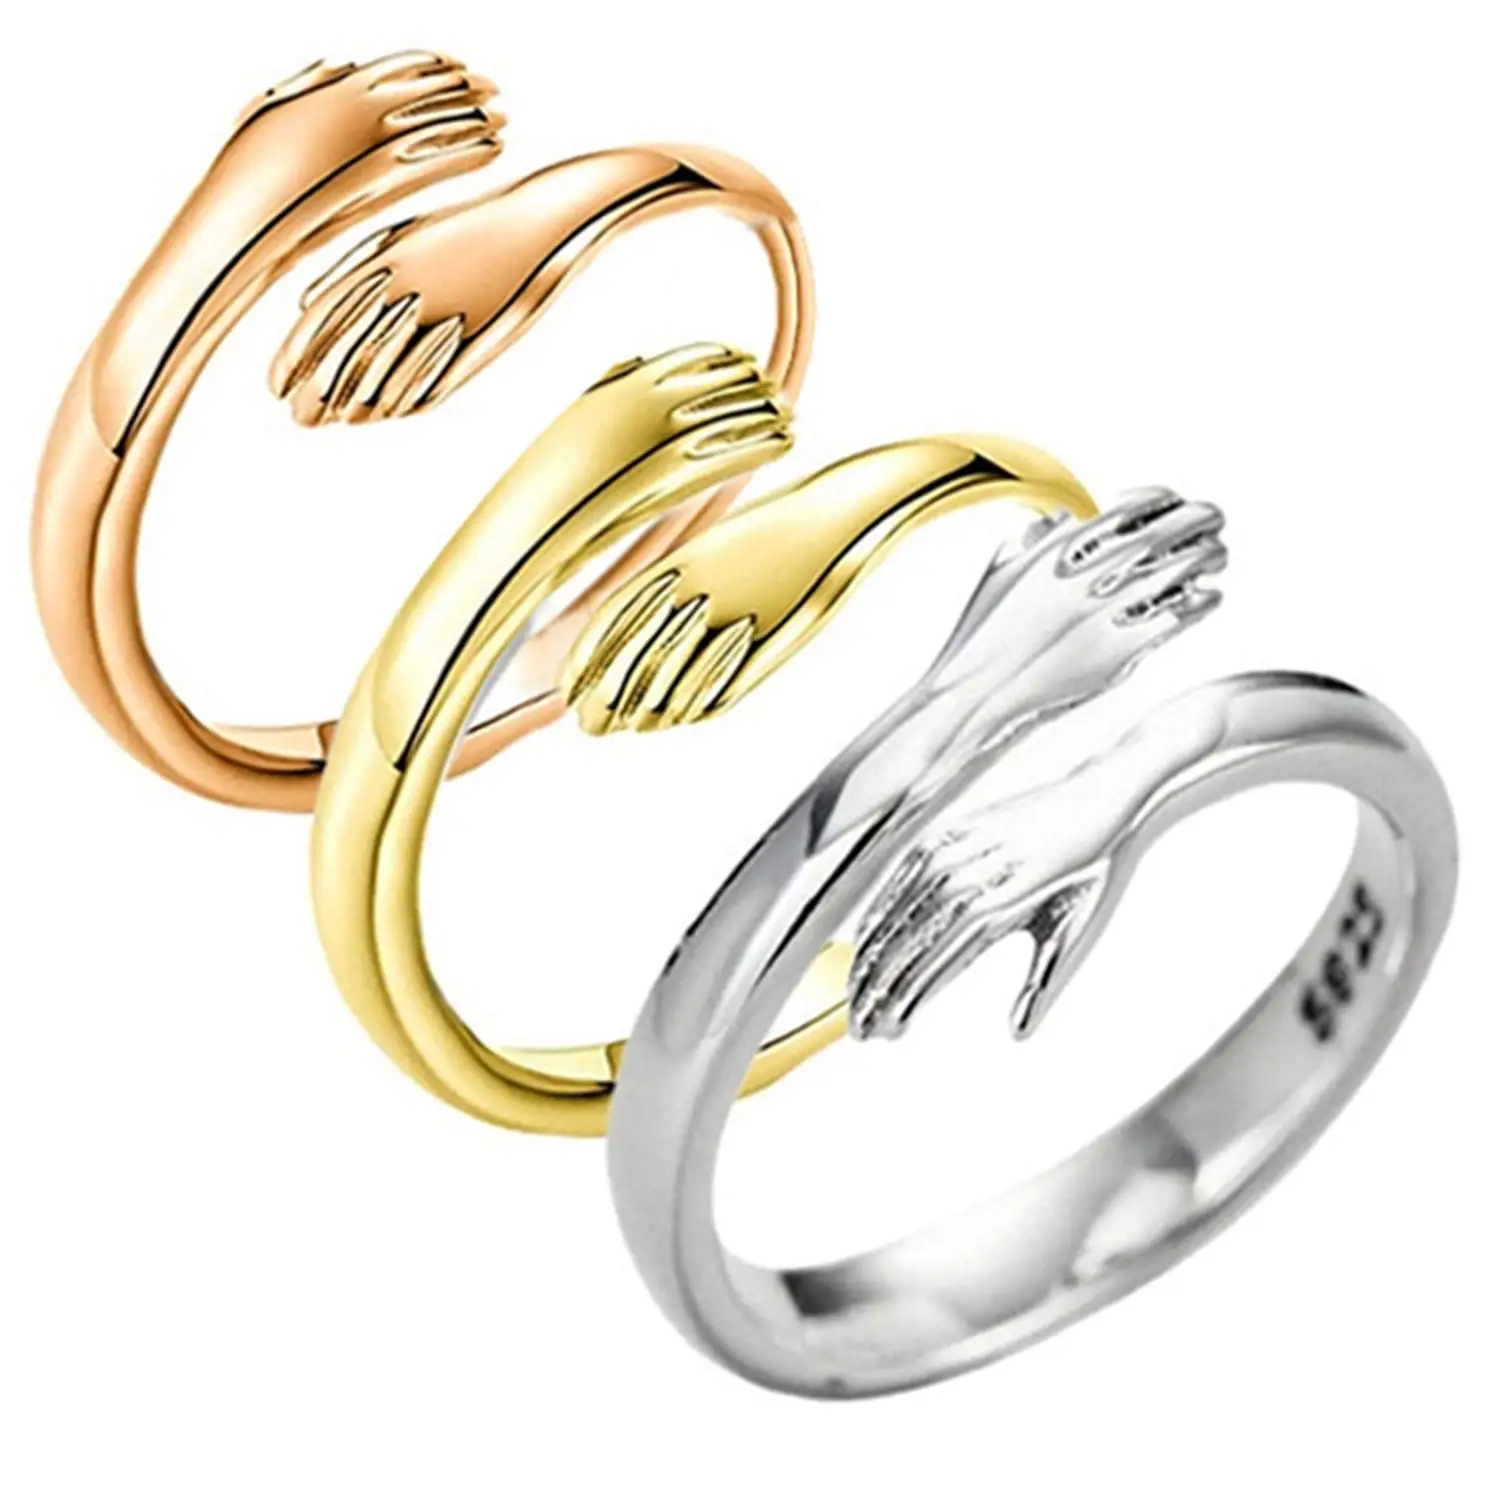 

Fashion Romantic Hug Hands Open Statement Rings Adjustable Couple Lover Engagement Bands Ring Jewelry for Women Party Gifts